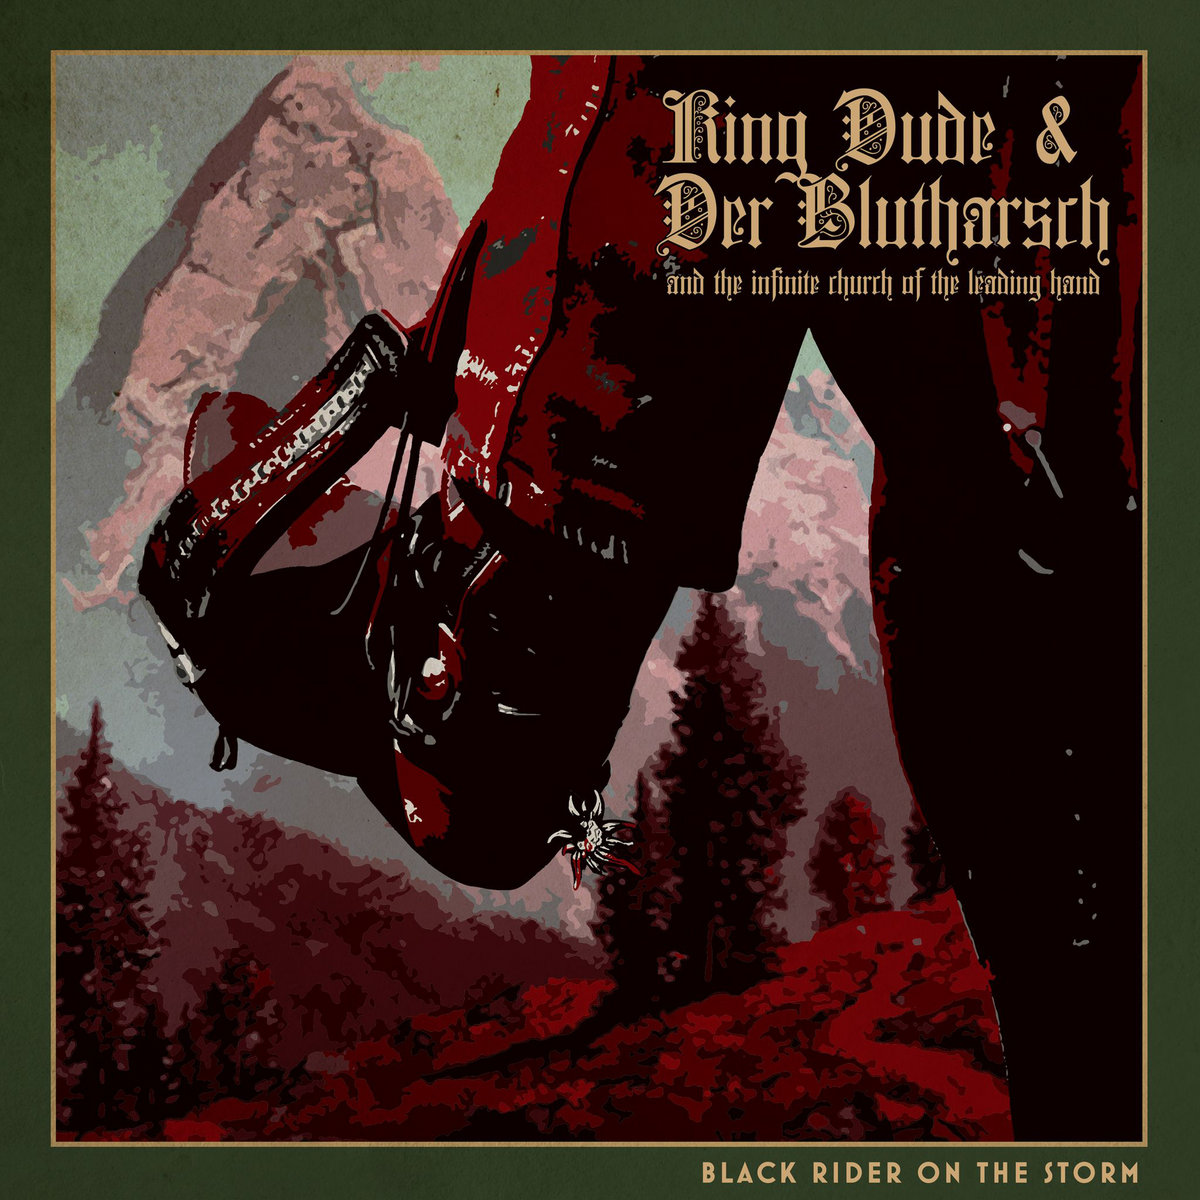 King Dude & Der Blutharsch and the Infinite Church of the Leading Hand – Black Rider on the storm (dark folk)